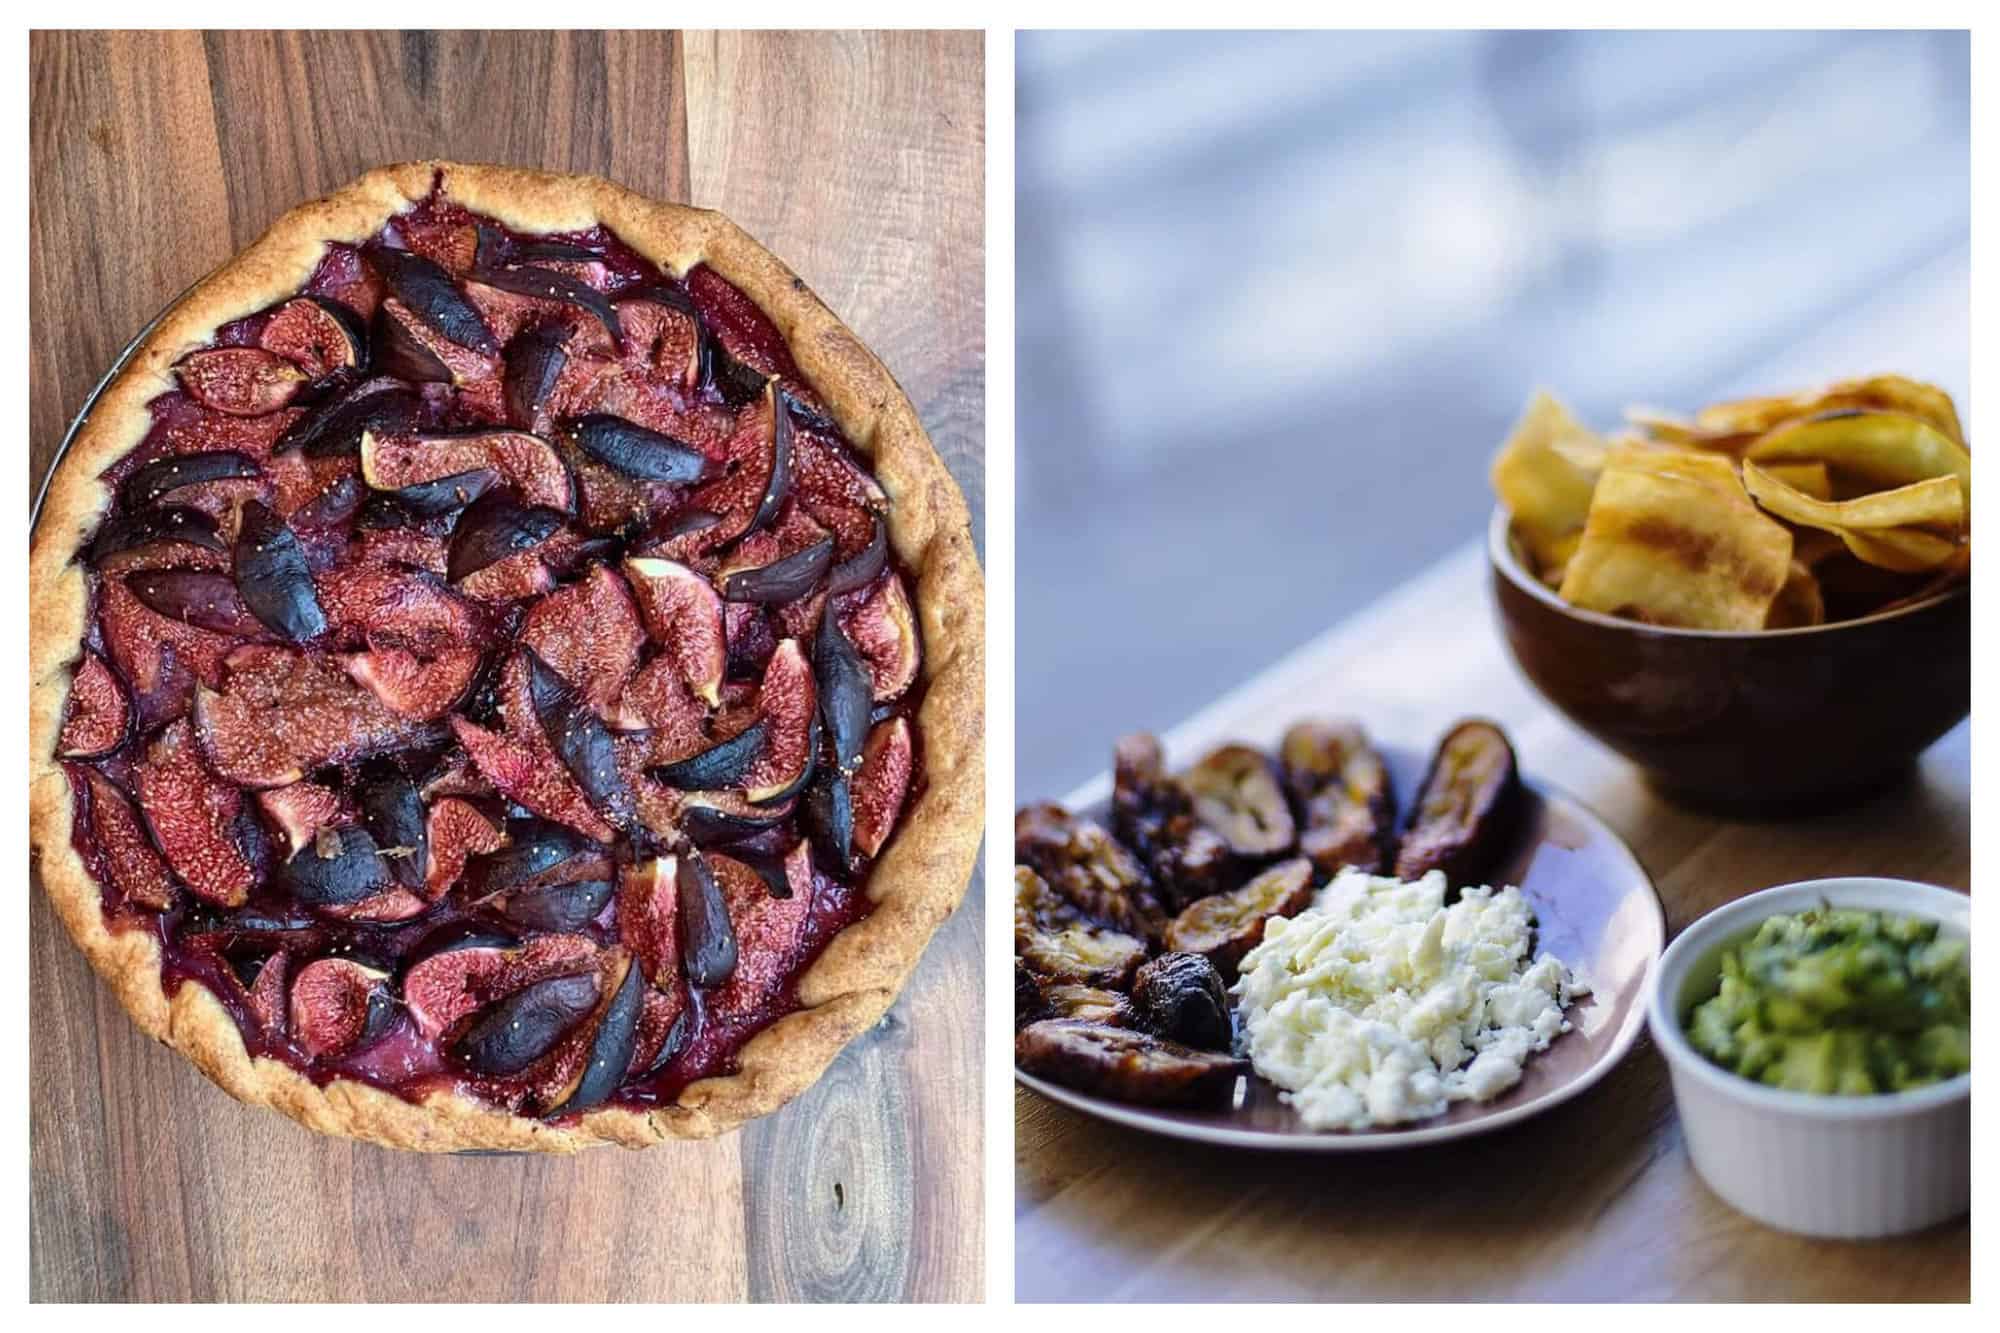 Left: an aerial view of a fig pie from Atelier P1. The pie is on top of a wooden table. Right: Food from Bululu Arepera. there are plantain chips, guacamole, and a grilled vegetable with fresh cheese.